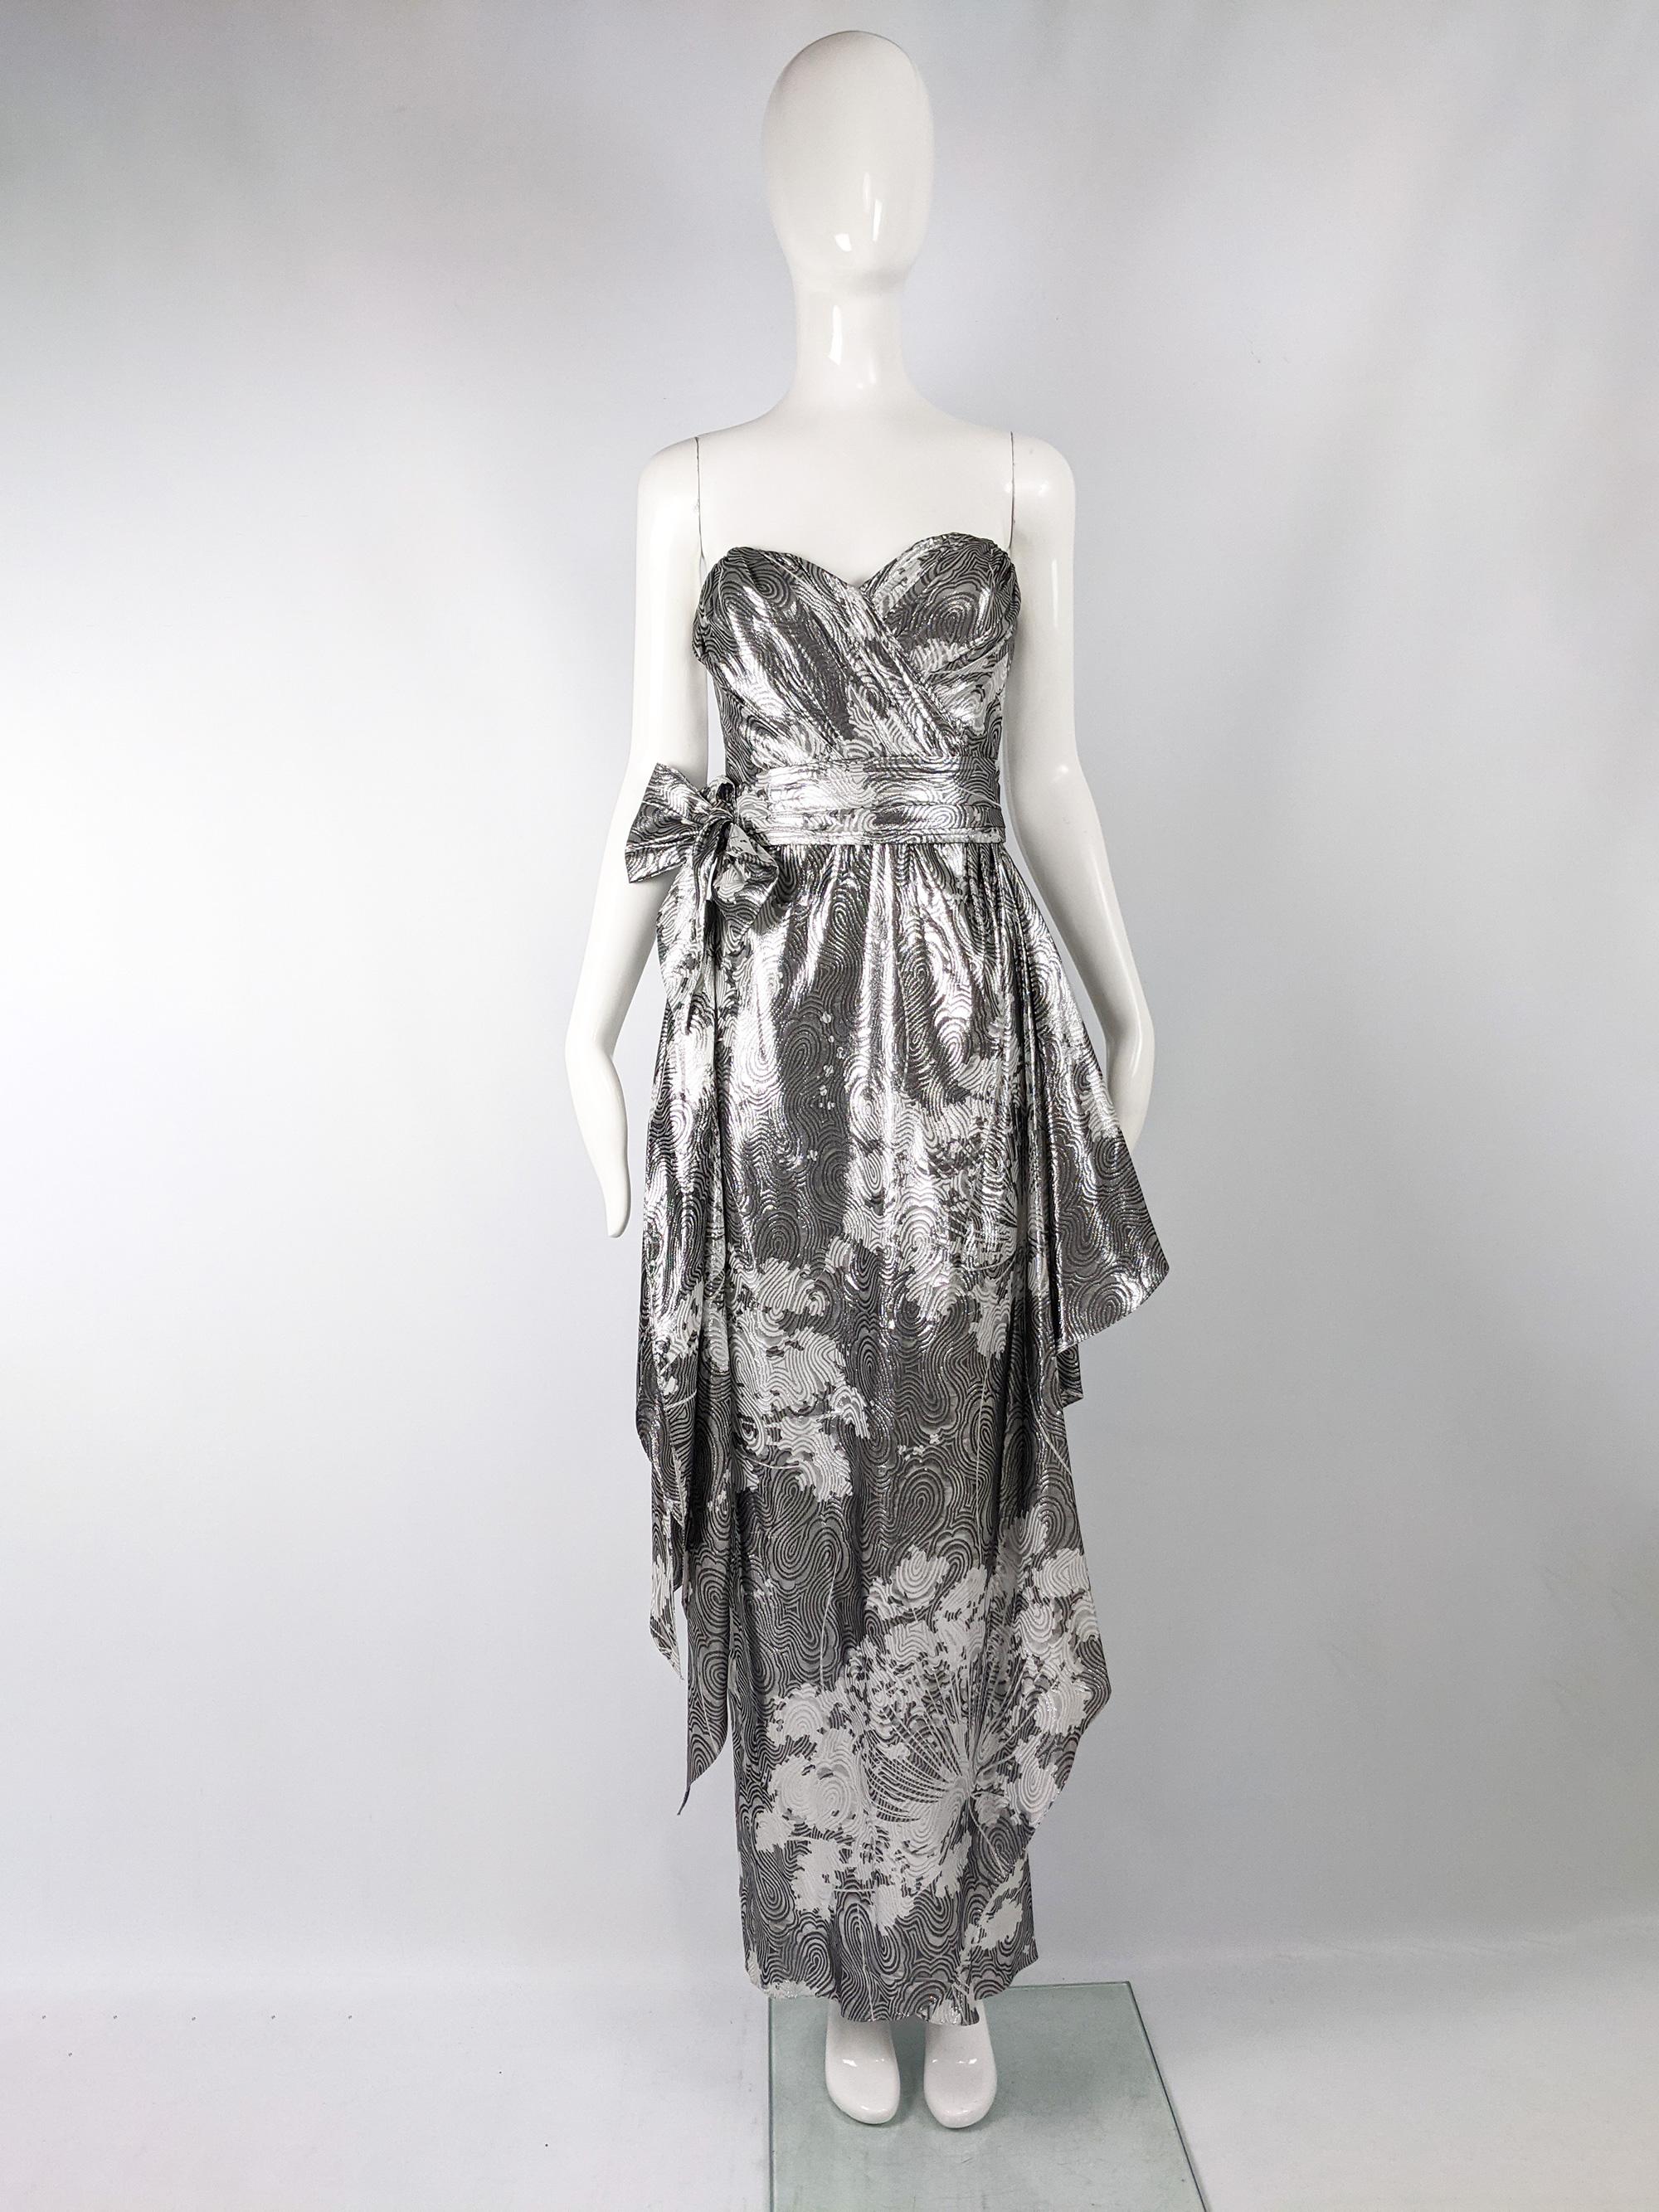 An elegant vintage evening gown from 1986 by British luxury designer Helen Anderson, it is made from a metallic silk lamé with a white floral print and shallow pattern throughout. It has a strapless design and a sash at the waist and drapes at the